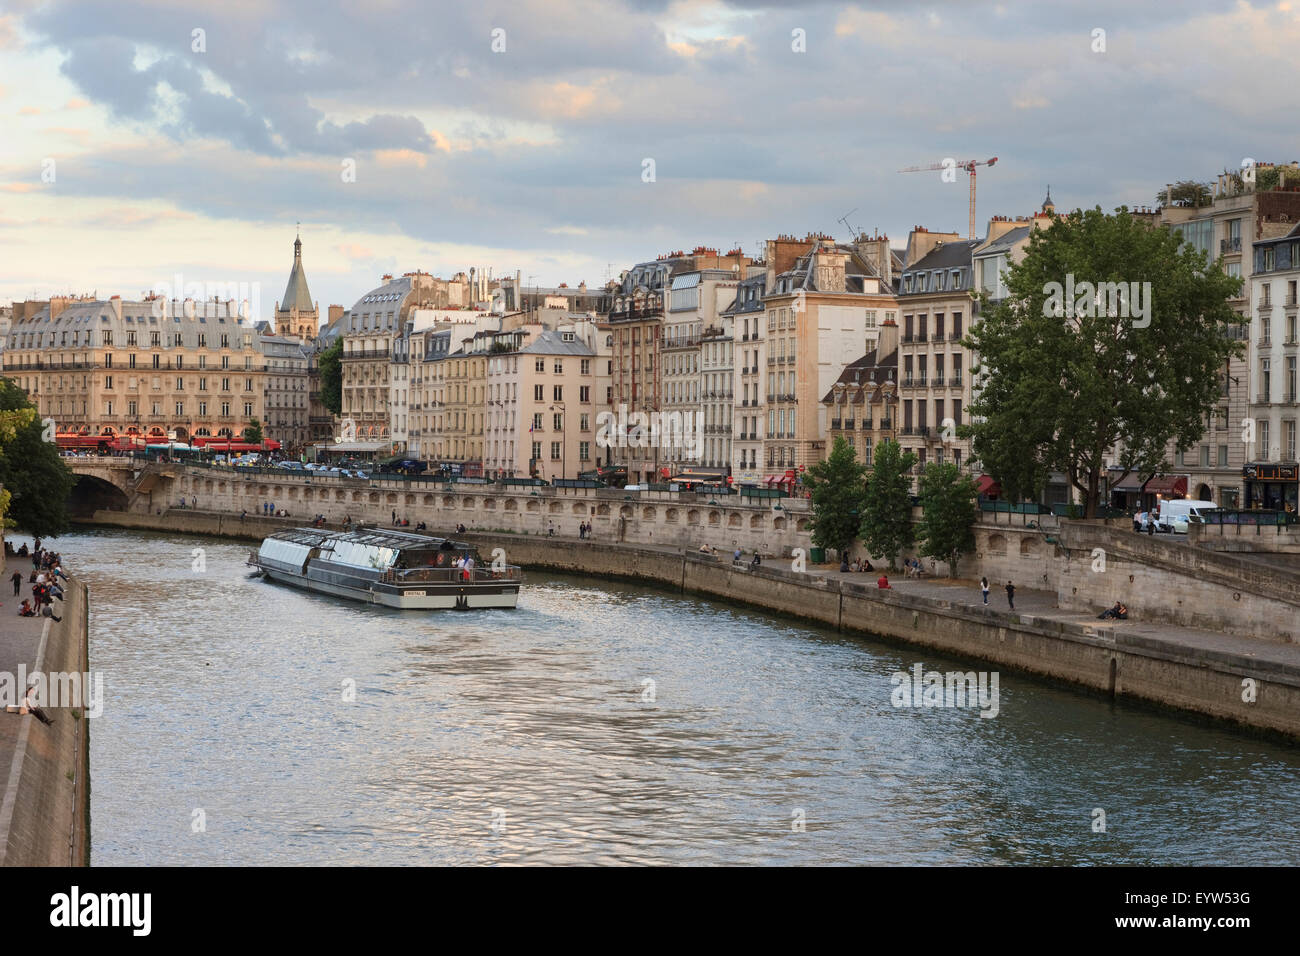 The view from Pont Neuf, looking across to the Quai des Grands Augustins in Paris, France. Stock Photo